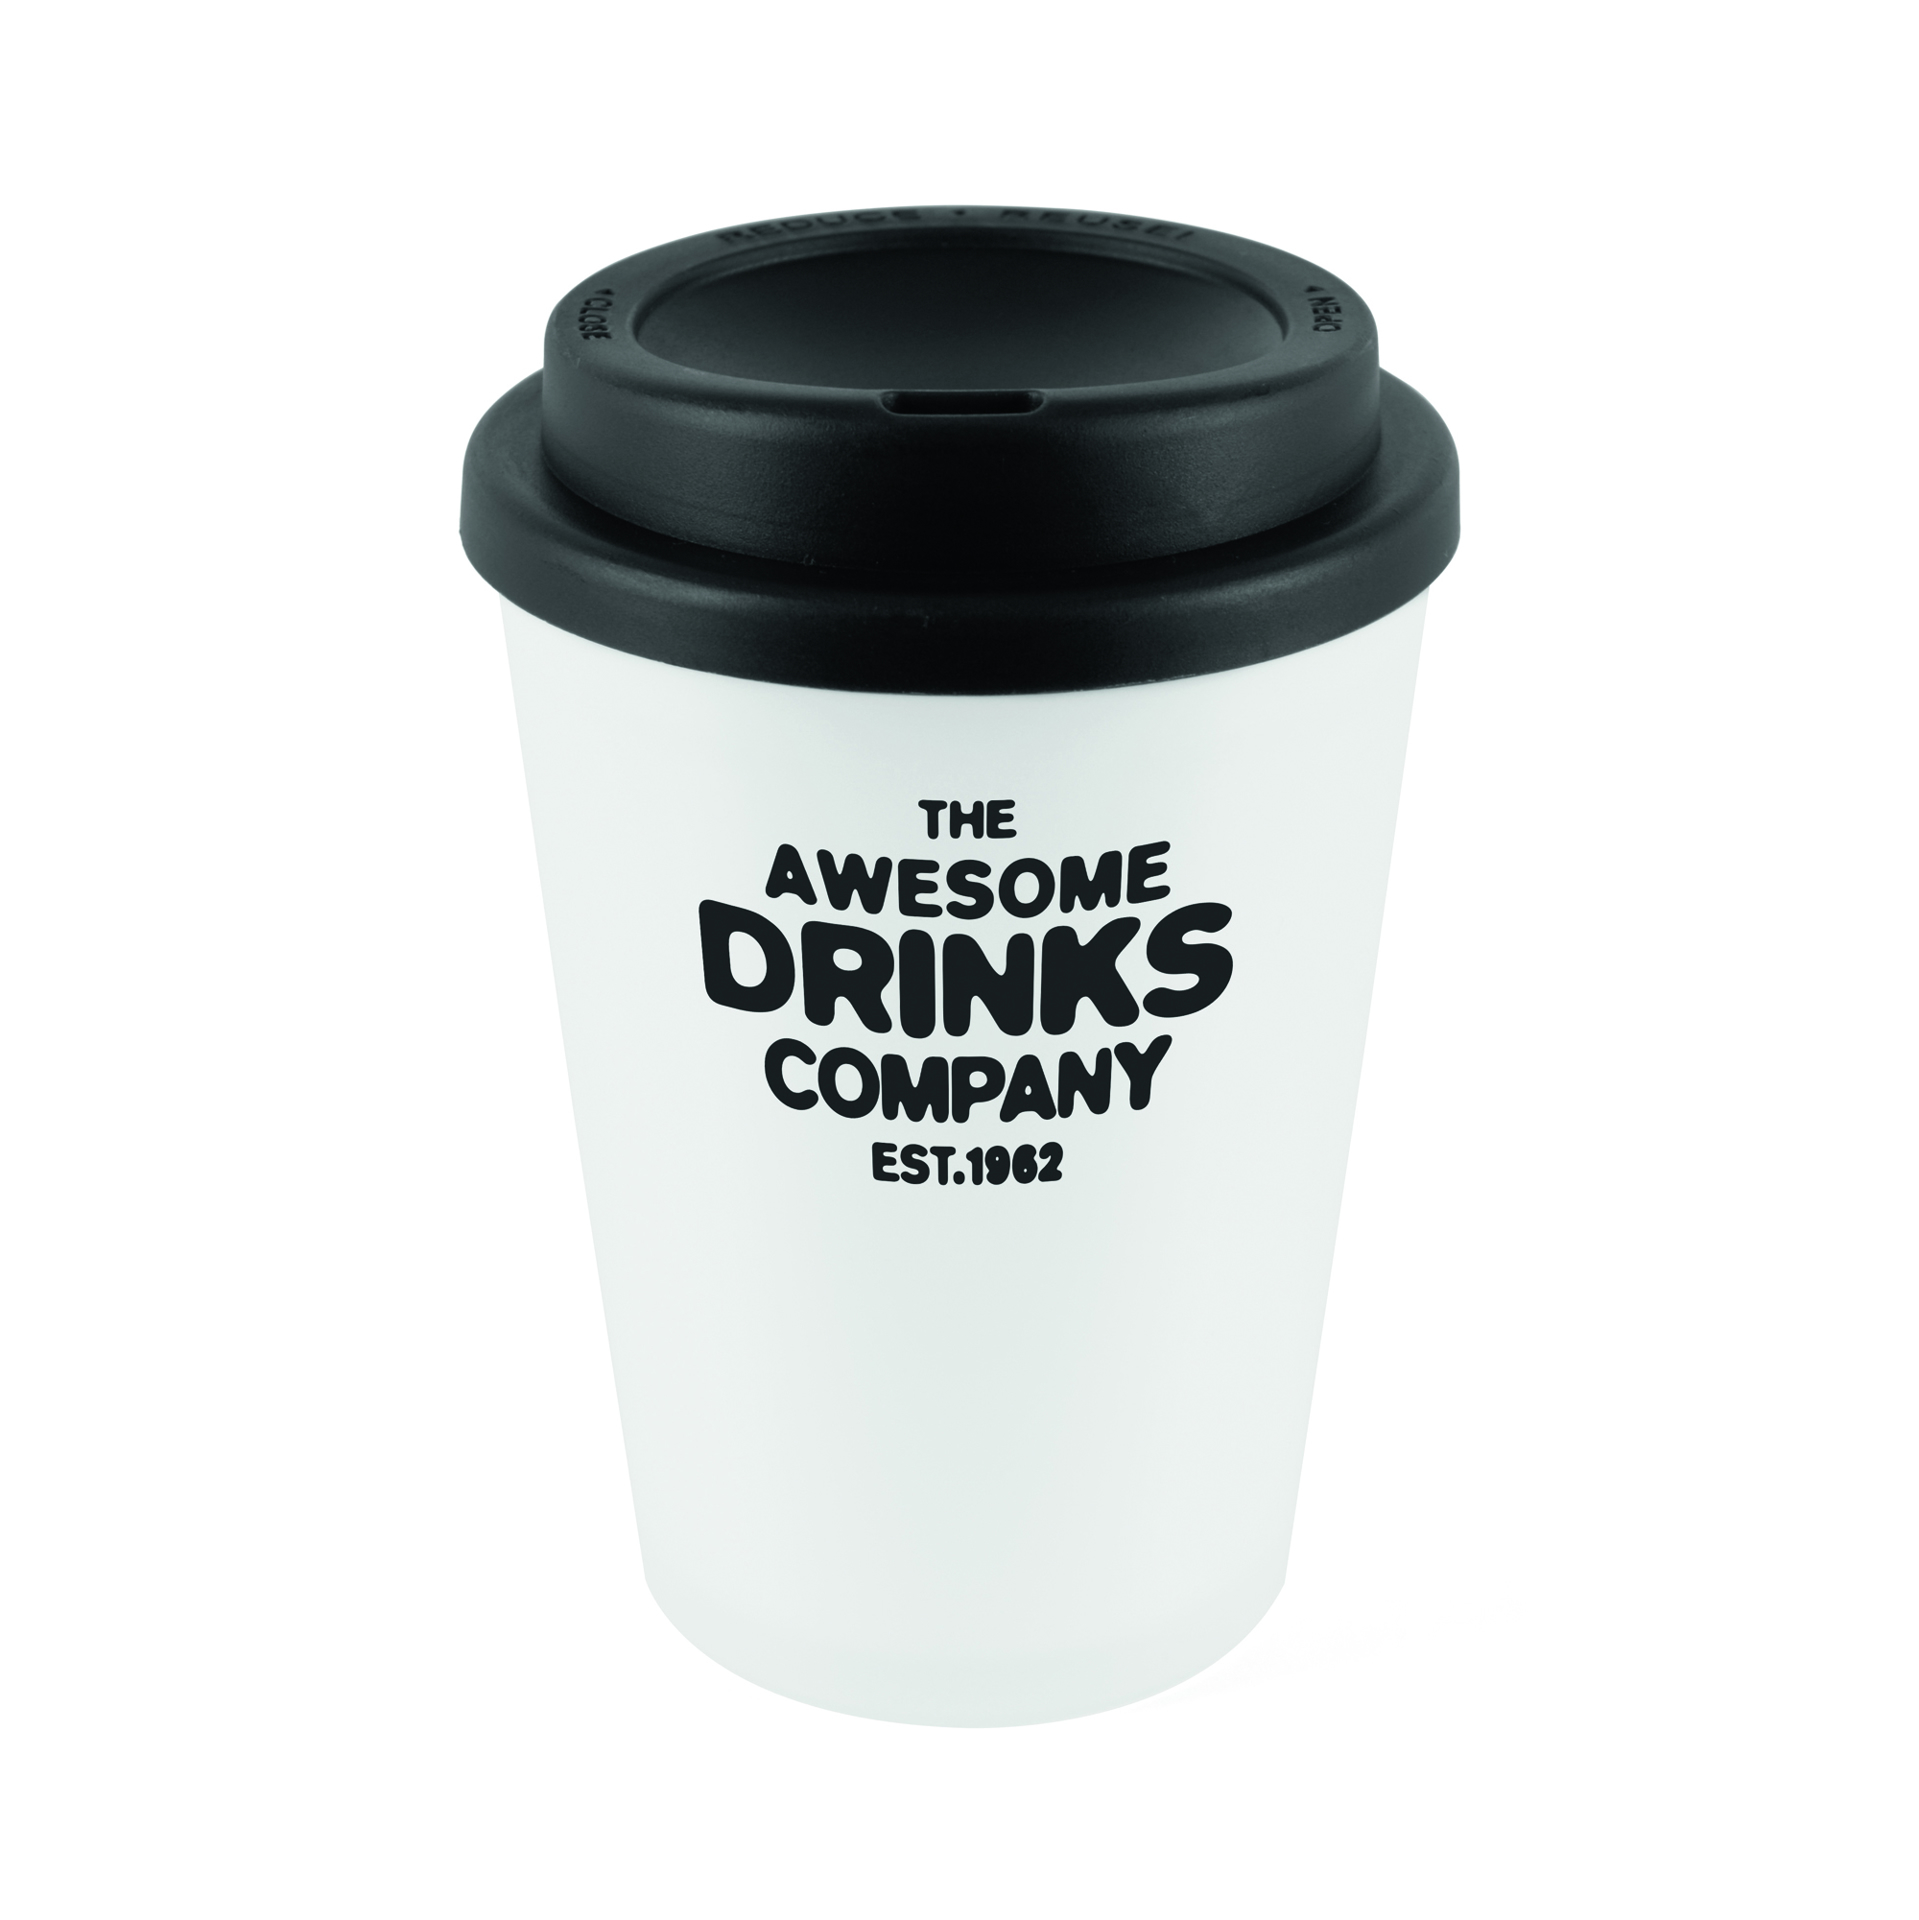 White reusable coffee cup tumbler with black lid printed with company logo